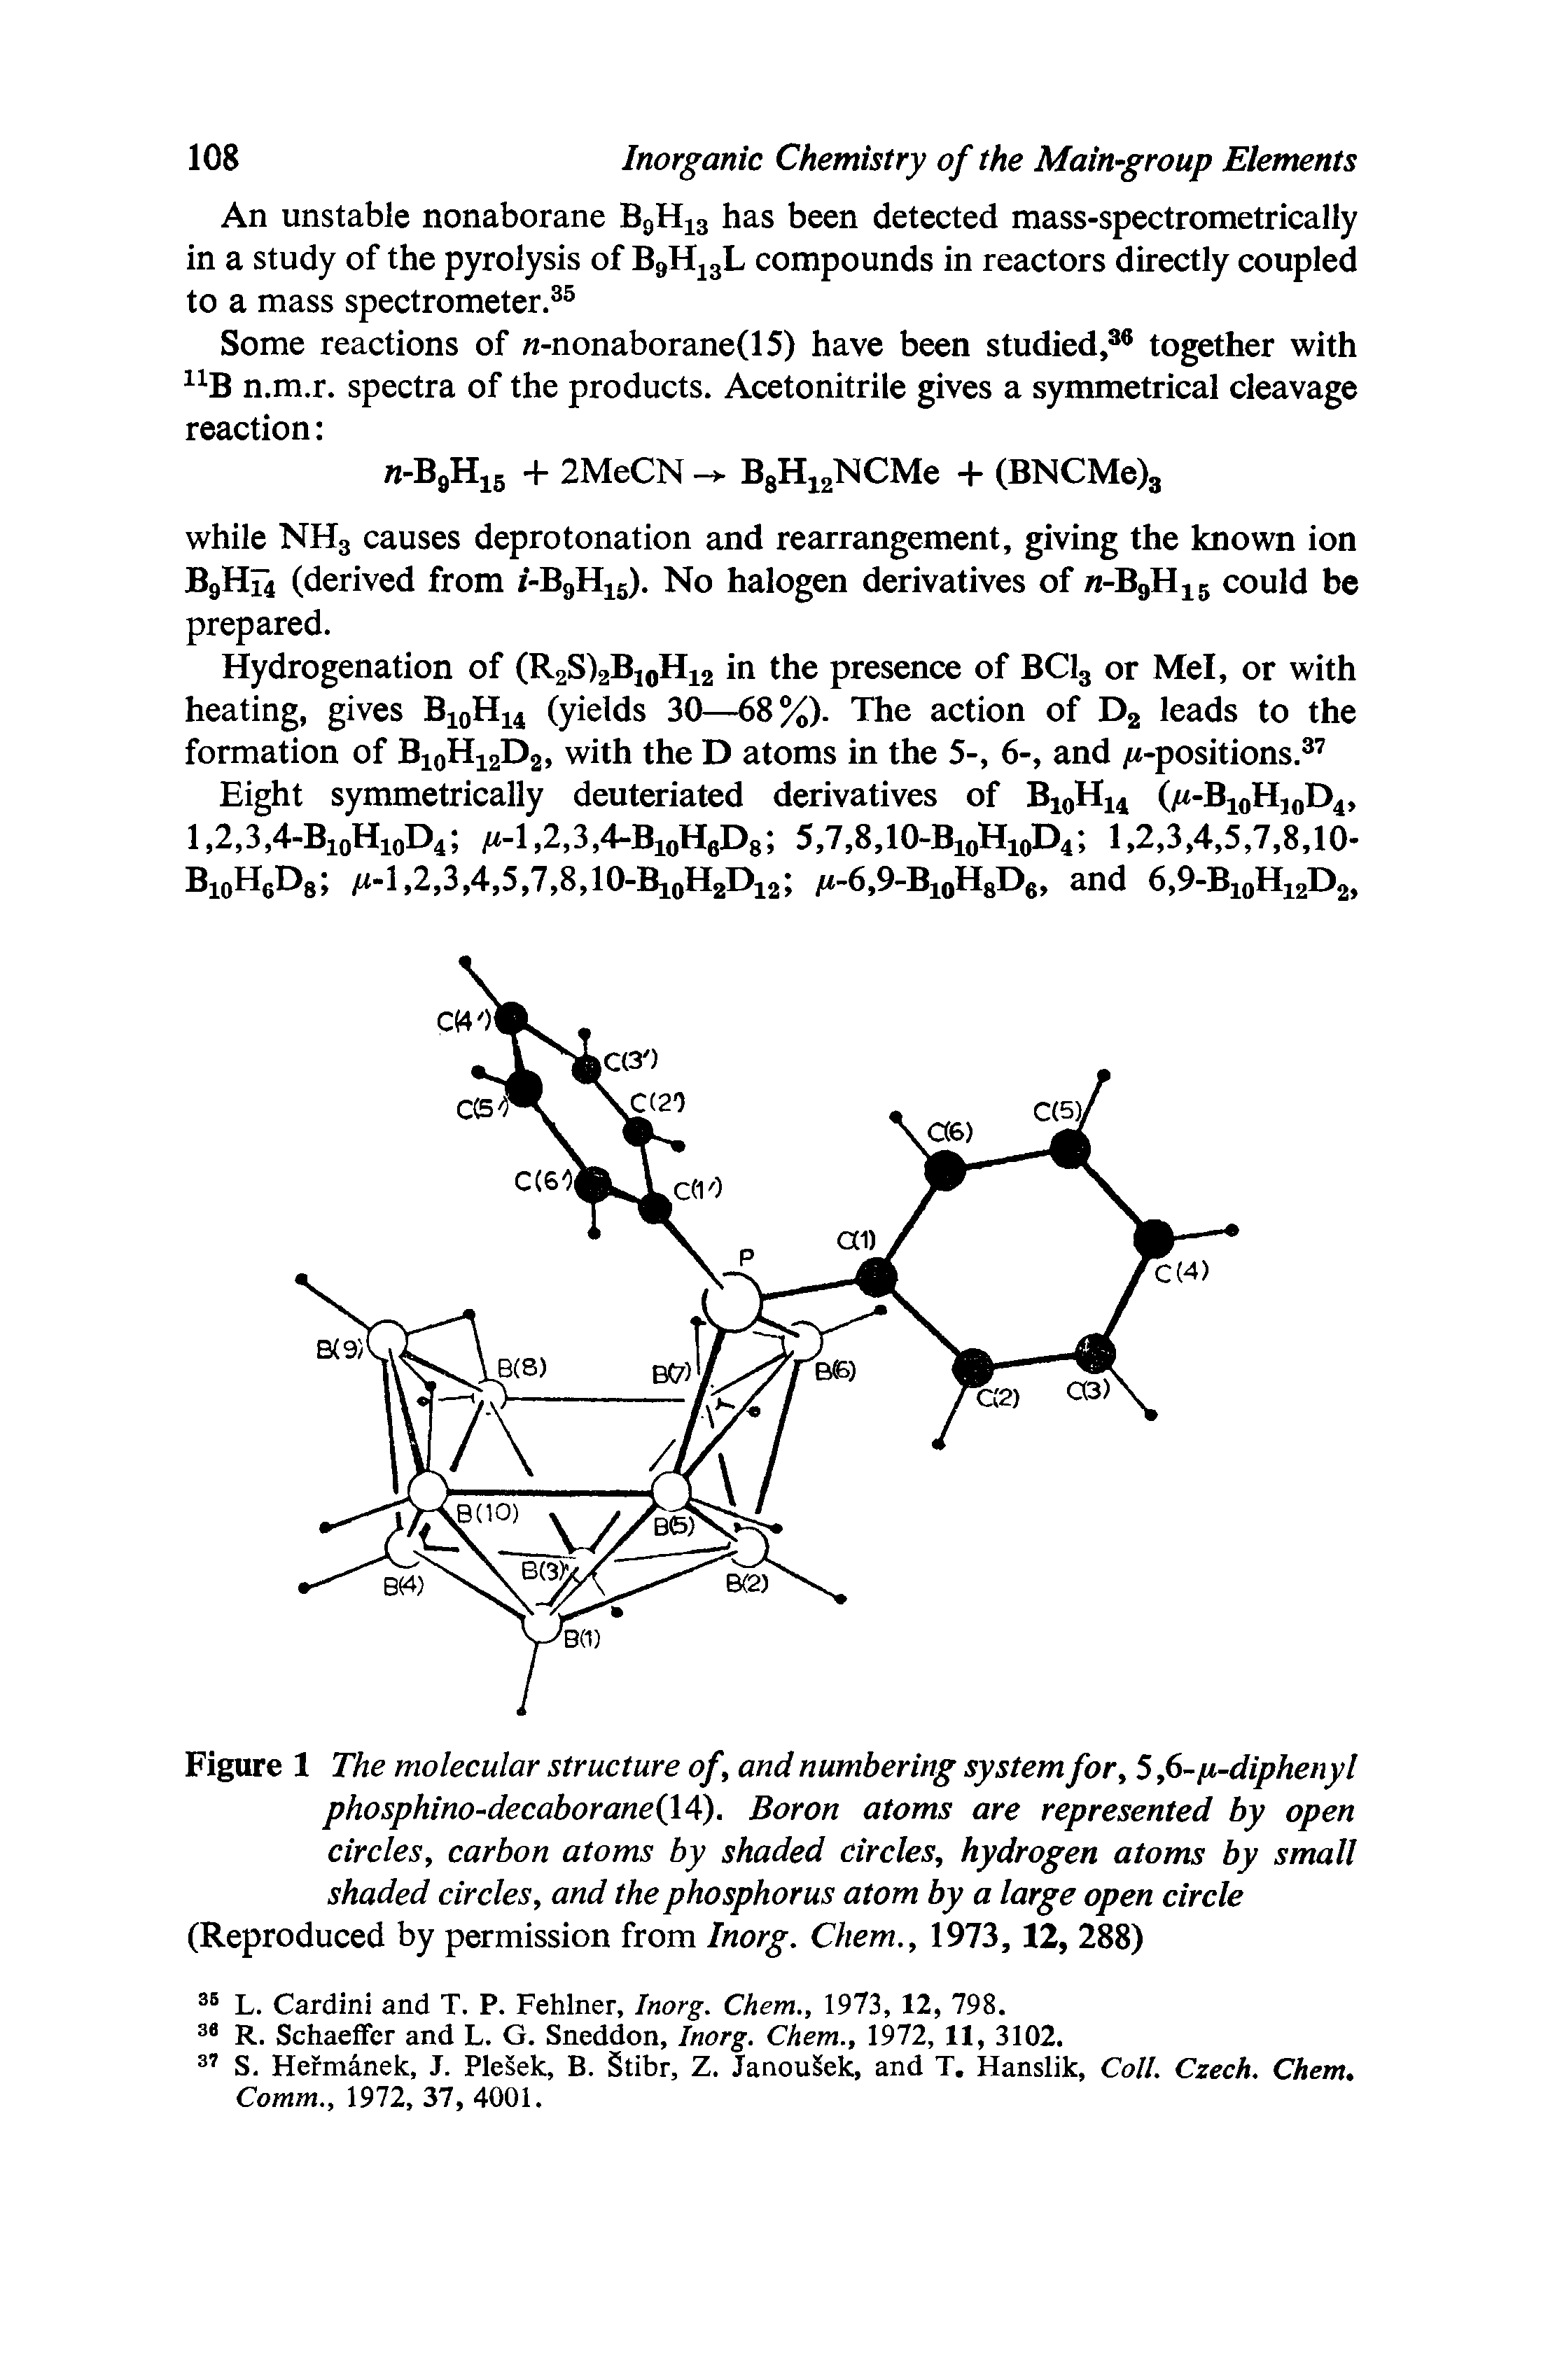 Figure 1 The molecular structure of, and numbering system for, 5jS-fi-diphenyl phosphino-decaborane A). Boron atoms are represented by open circles, carbon atoms by shaded circles, hydrogen atoms by small shaded circles, and the phosphorus atom by a large open circle (Reproduced by permission from Inorg. Chem., 1973,12, 288)...